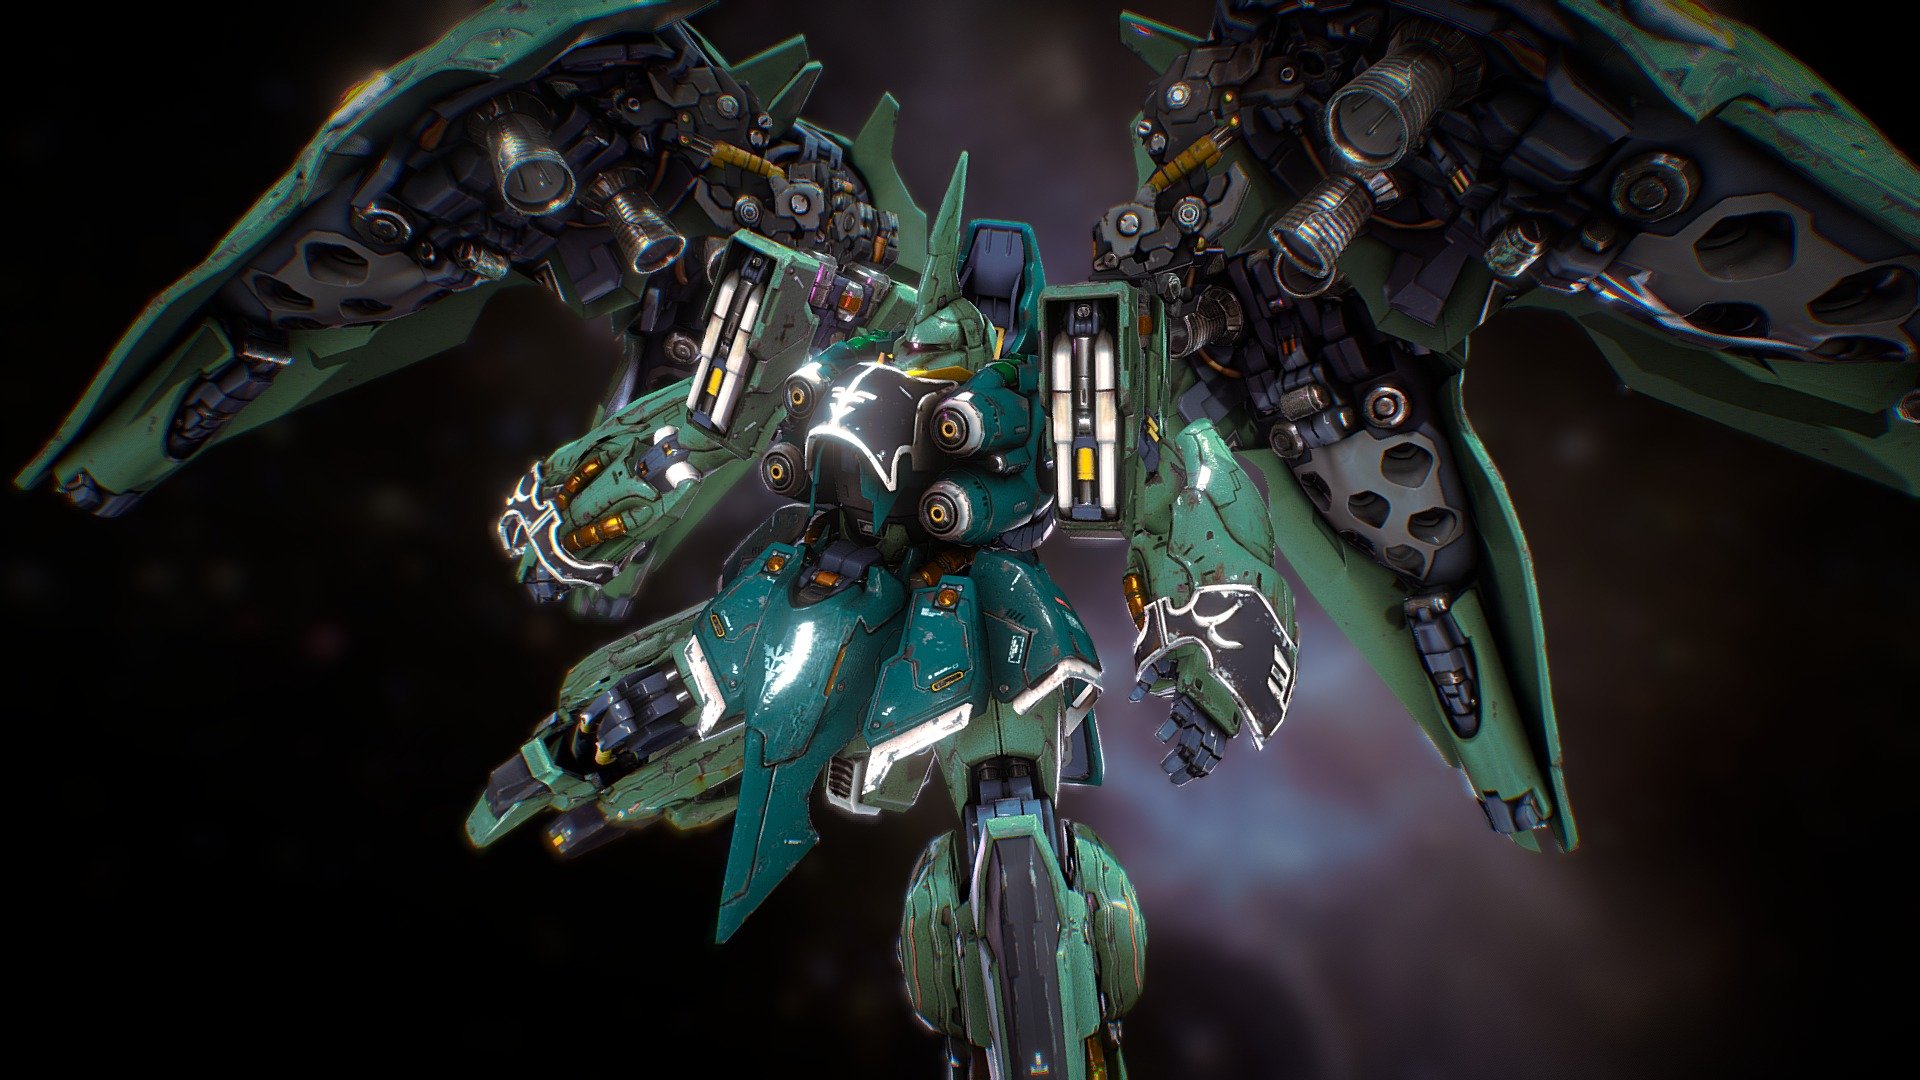 The Kshatriya is a mobile suit based on the NZ-000 Queen Mansa used by the first Neo Zeon.

Made in 3ds max 

Old project I made 6 years ago 3d model